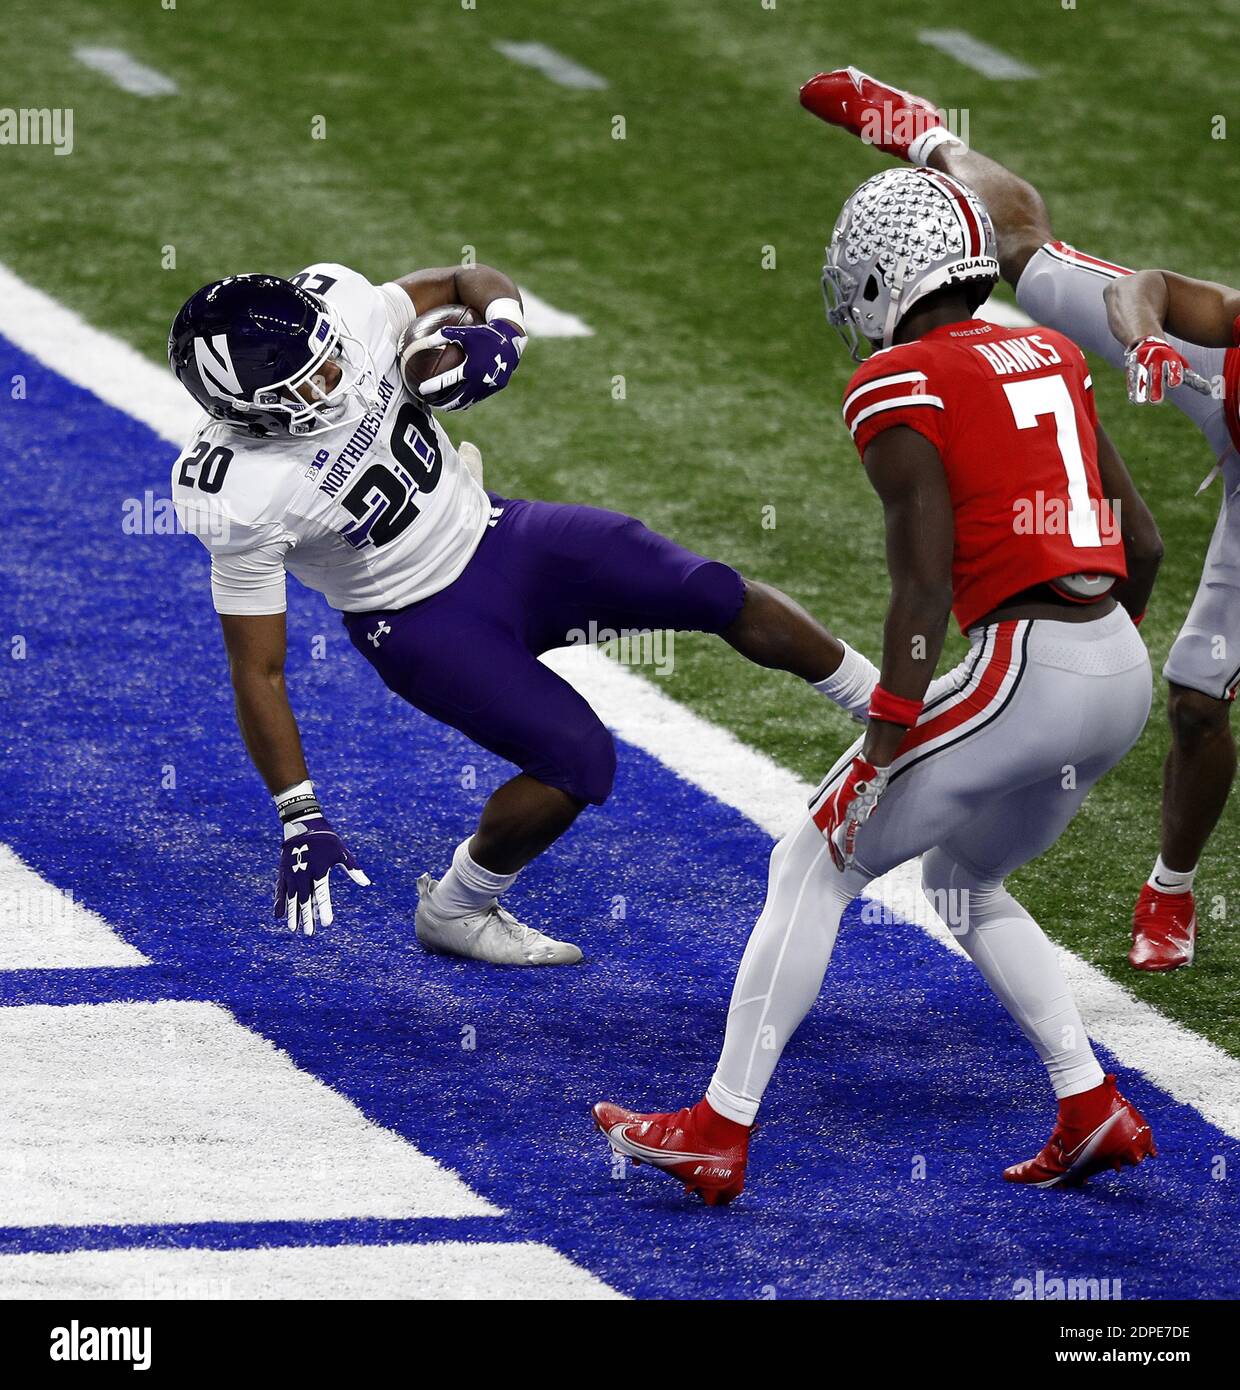 Indianapolis, United States. 19th Dec, 2020. Northwestern Wildcats Cam Porter (20) stumbles into the endzone for a touchdown in front of Ohio State Buckeyes Stevyn Banks (7) during the first half of the Big Ten Championship Saturday, December 19, 2020 in Indianapolis, Indiana. Photo by Aaron Josefczyk/UPI Credit: UPI/Alamy Live News Stock Photo